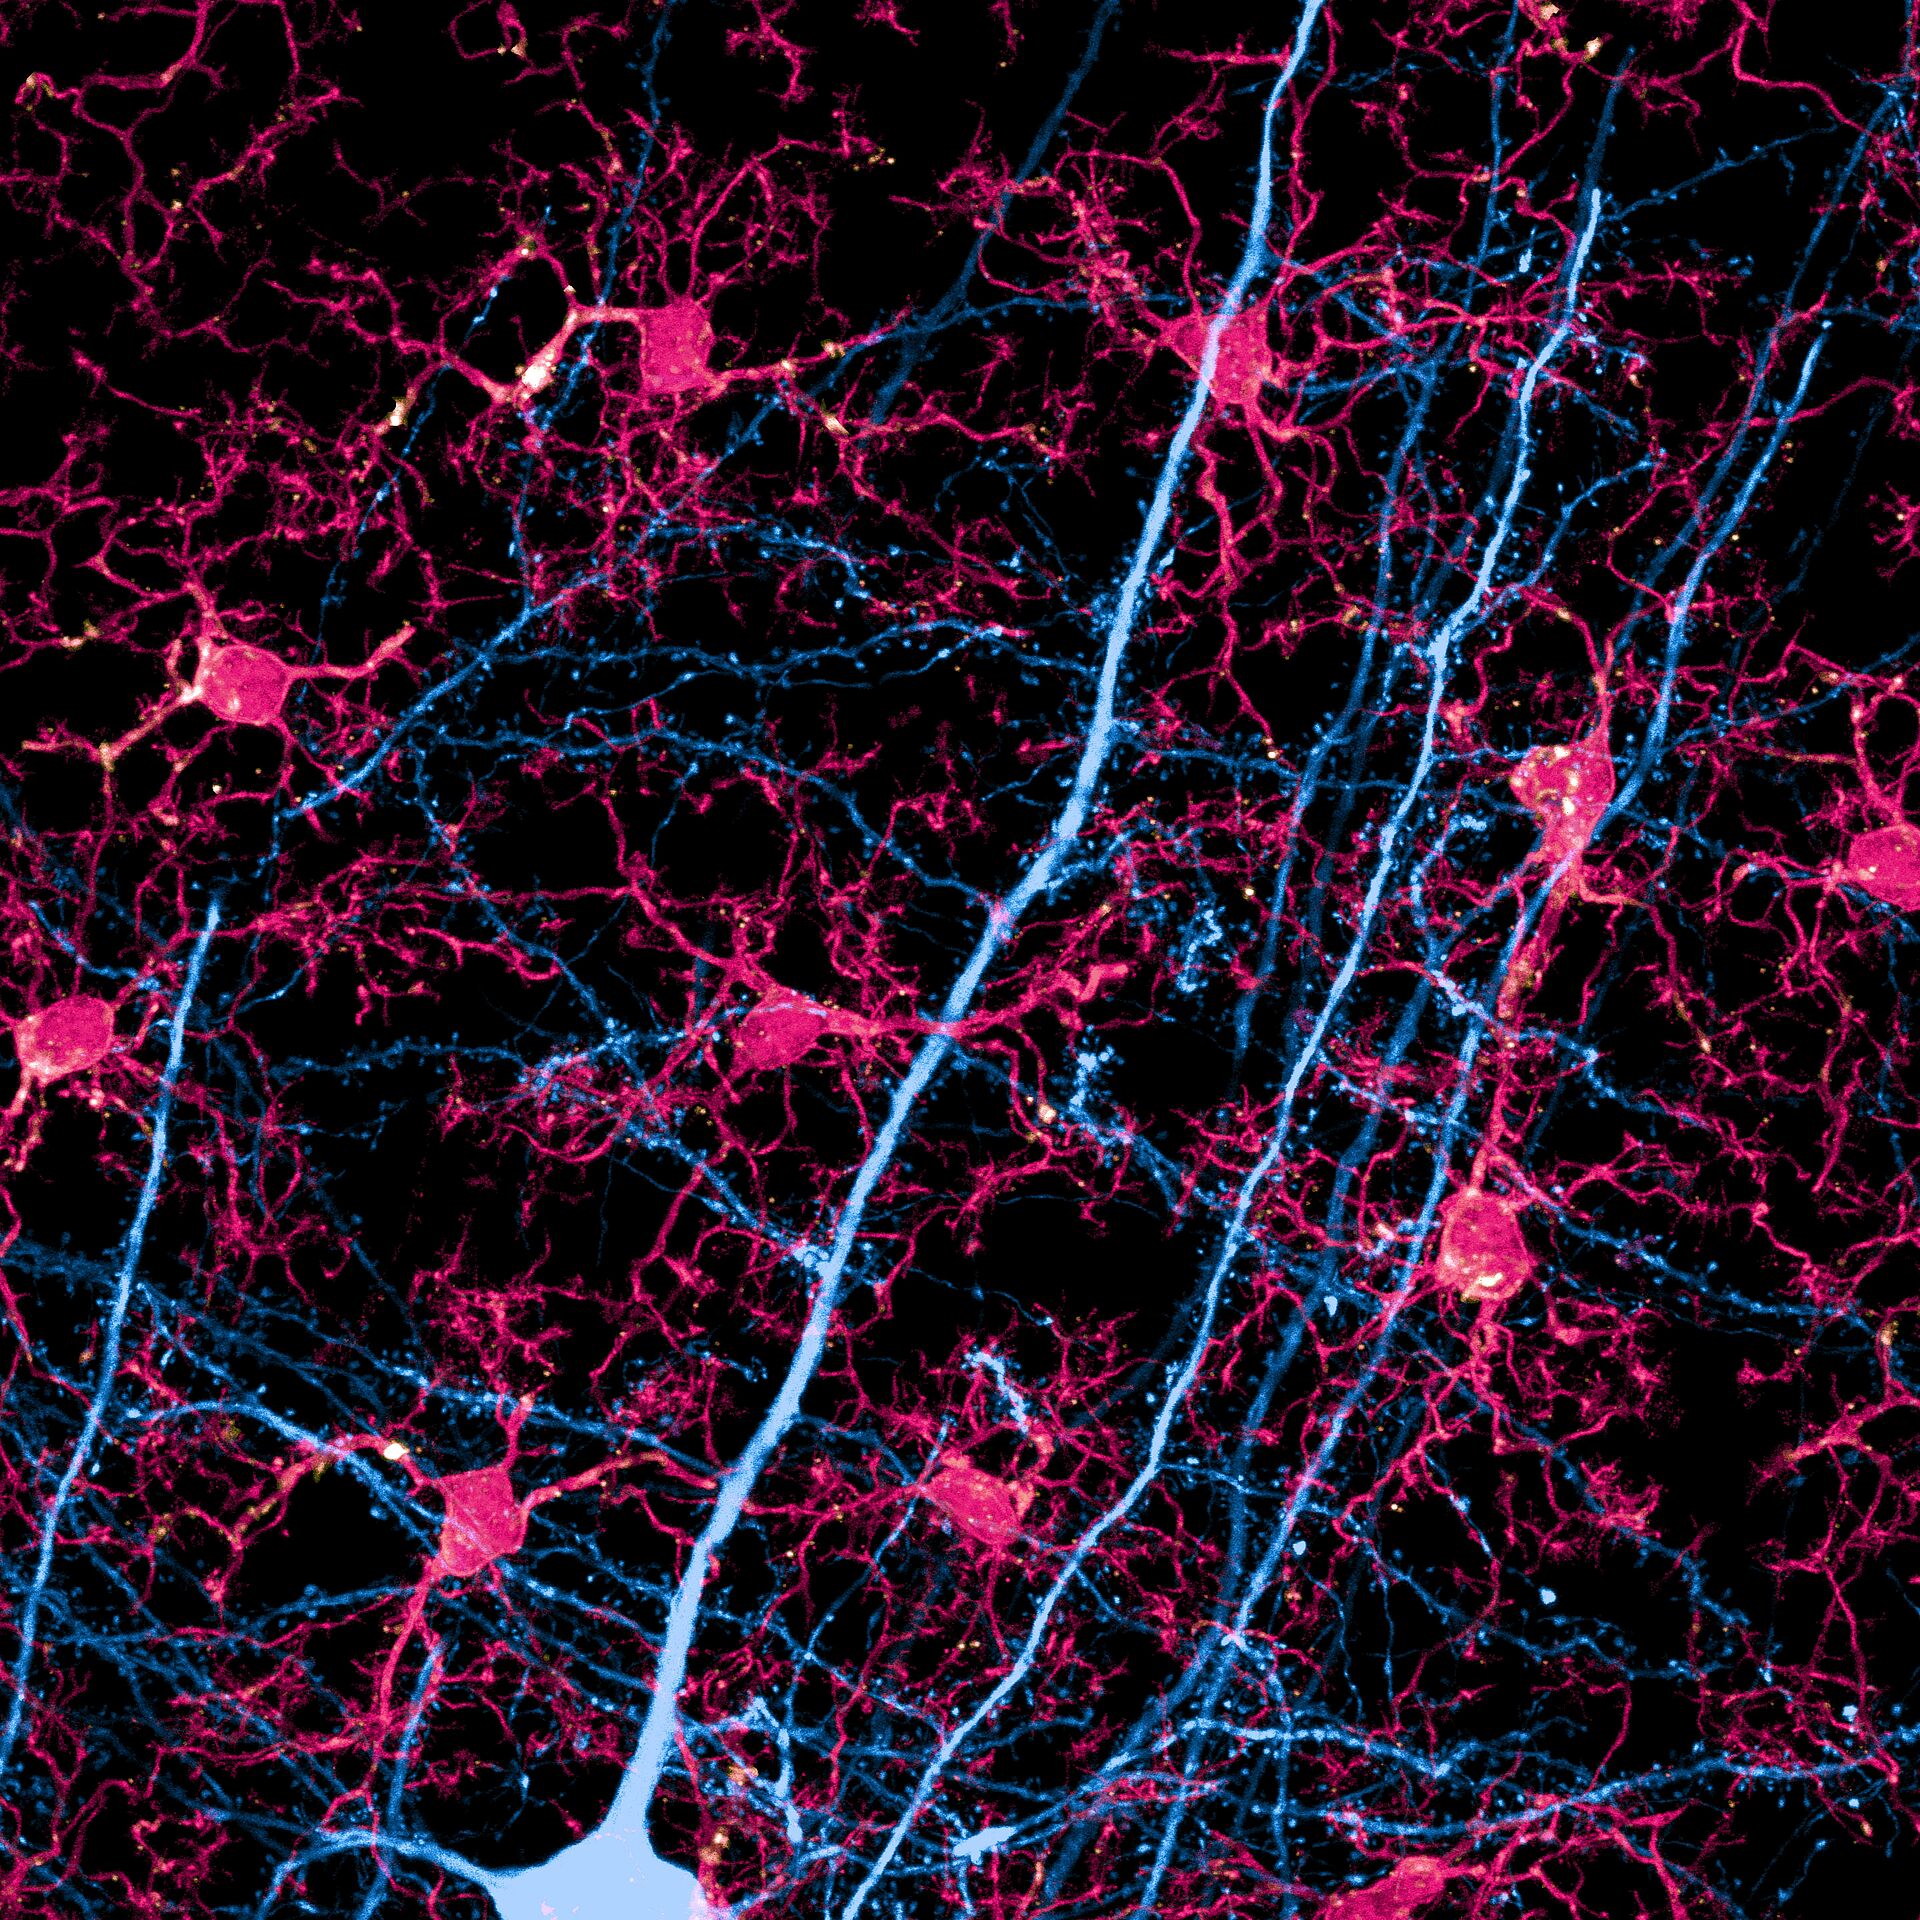 Projections of a neuron (blue) and microglia (rot) under the microscope.